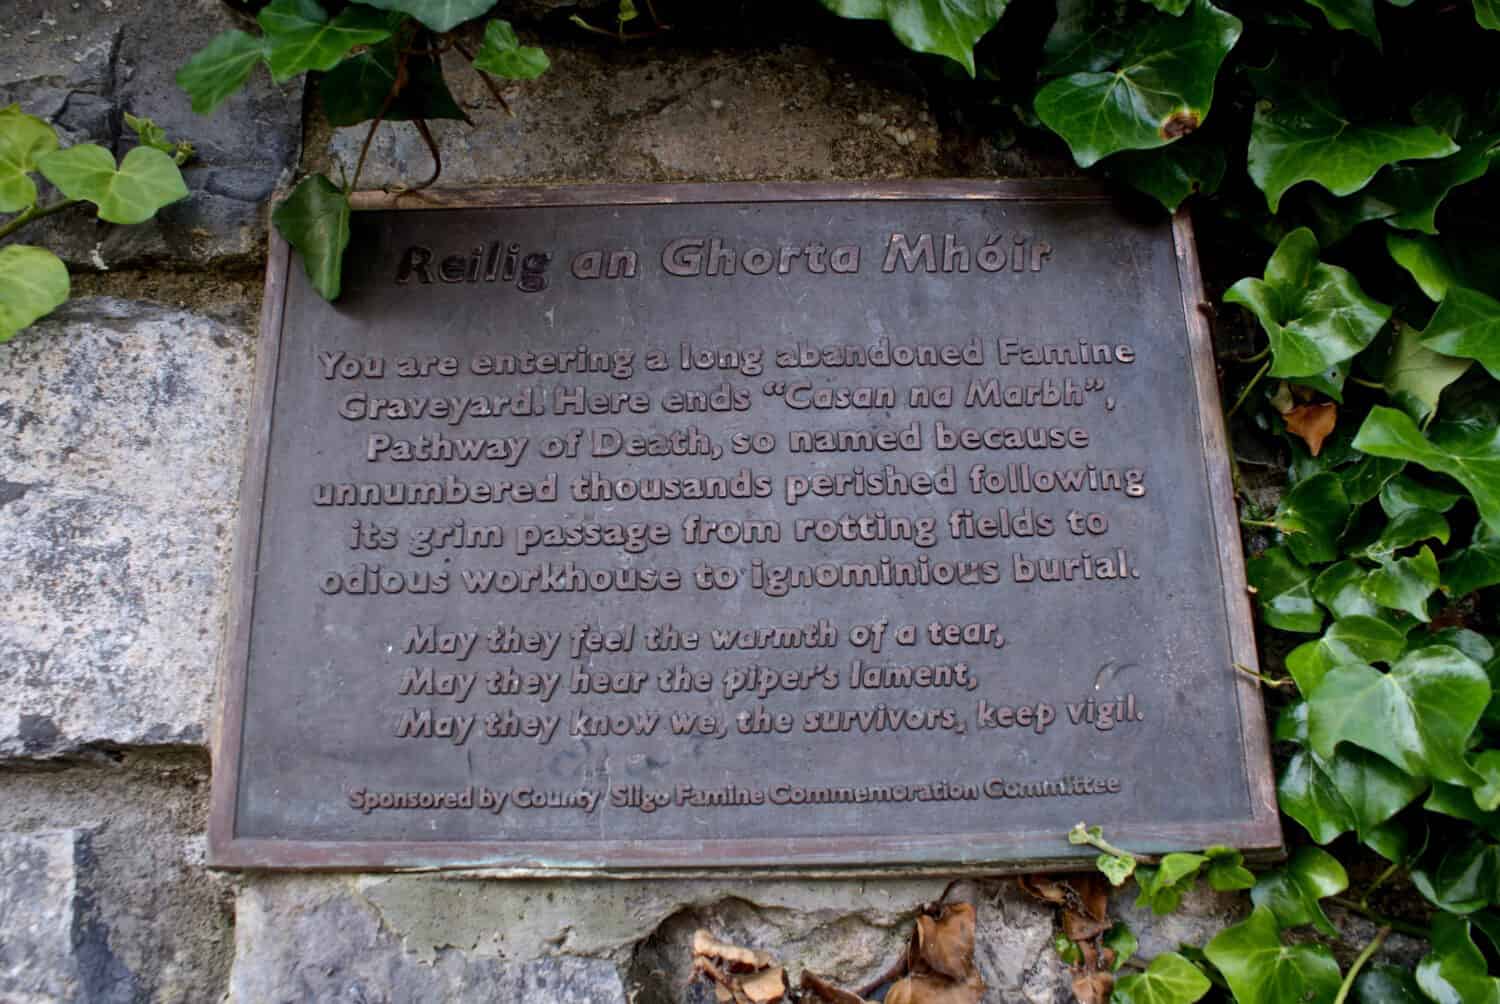 An famine graveyard site in Ireland features a plaque lamenting the fate and honoring the memory of the Great Hunger's victims during the misnamed "potato famine" 1845-51.